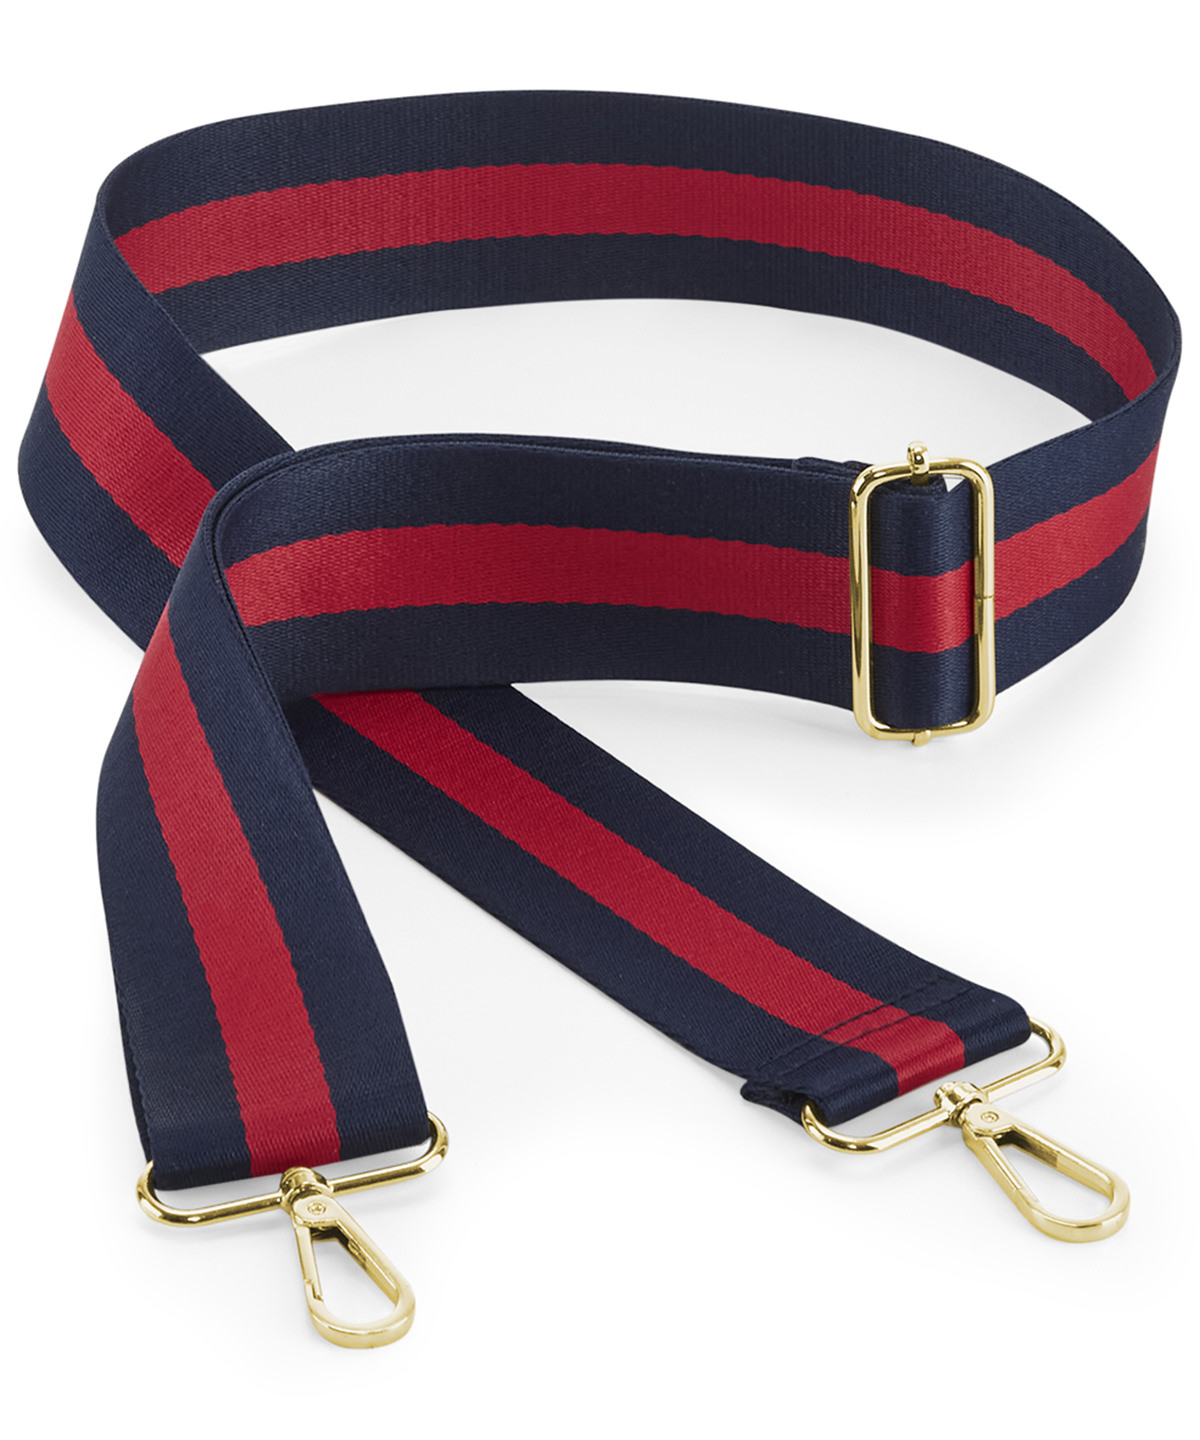 Boutique Adjustable Bag Strap Navy/Red Size One Size